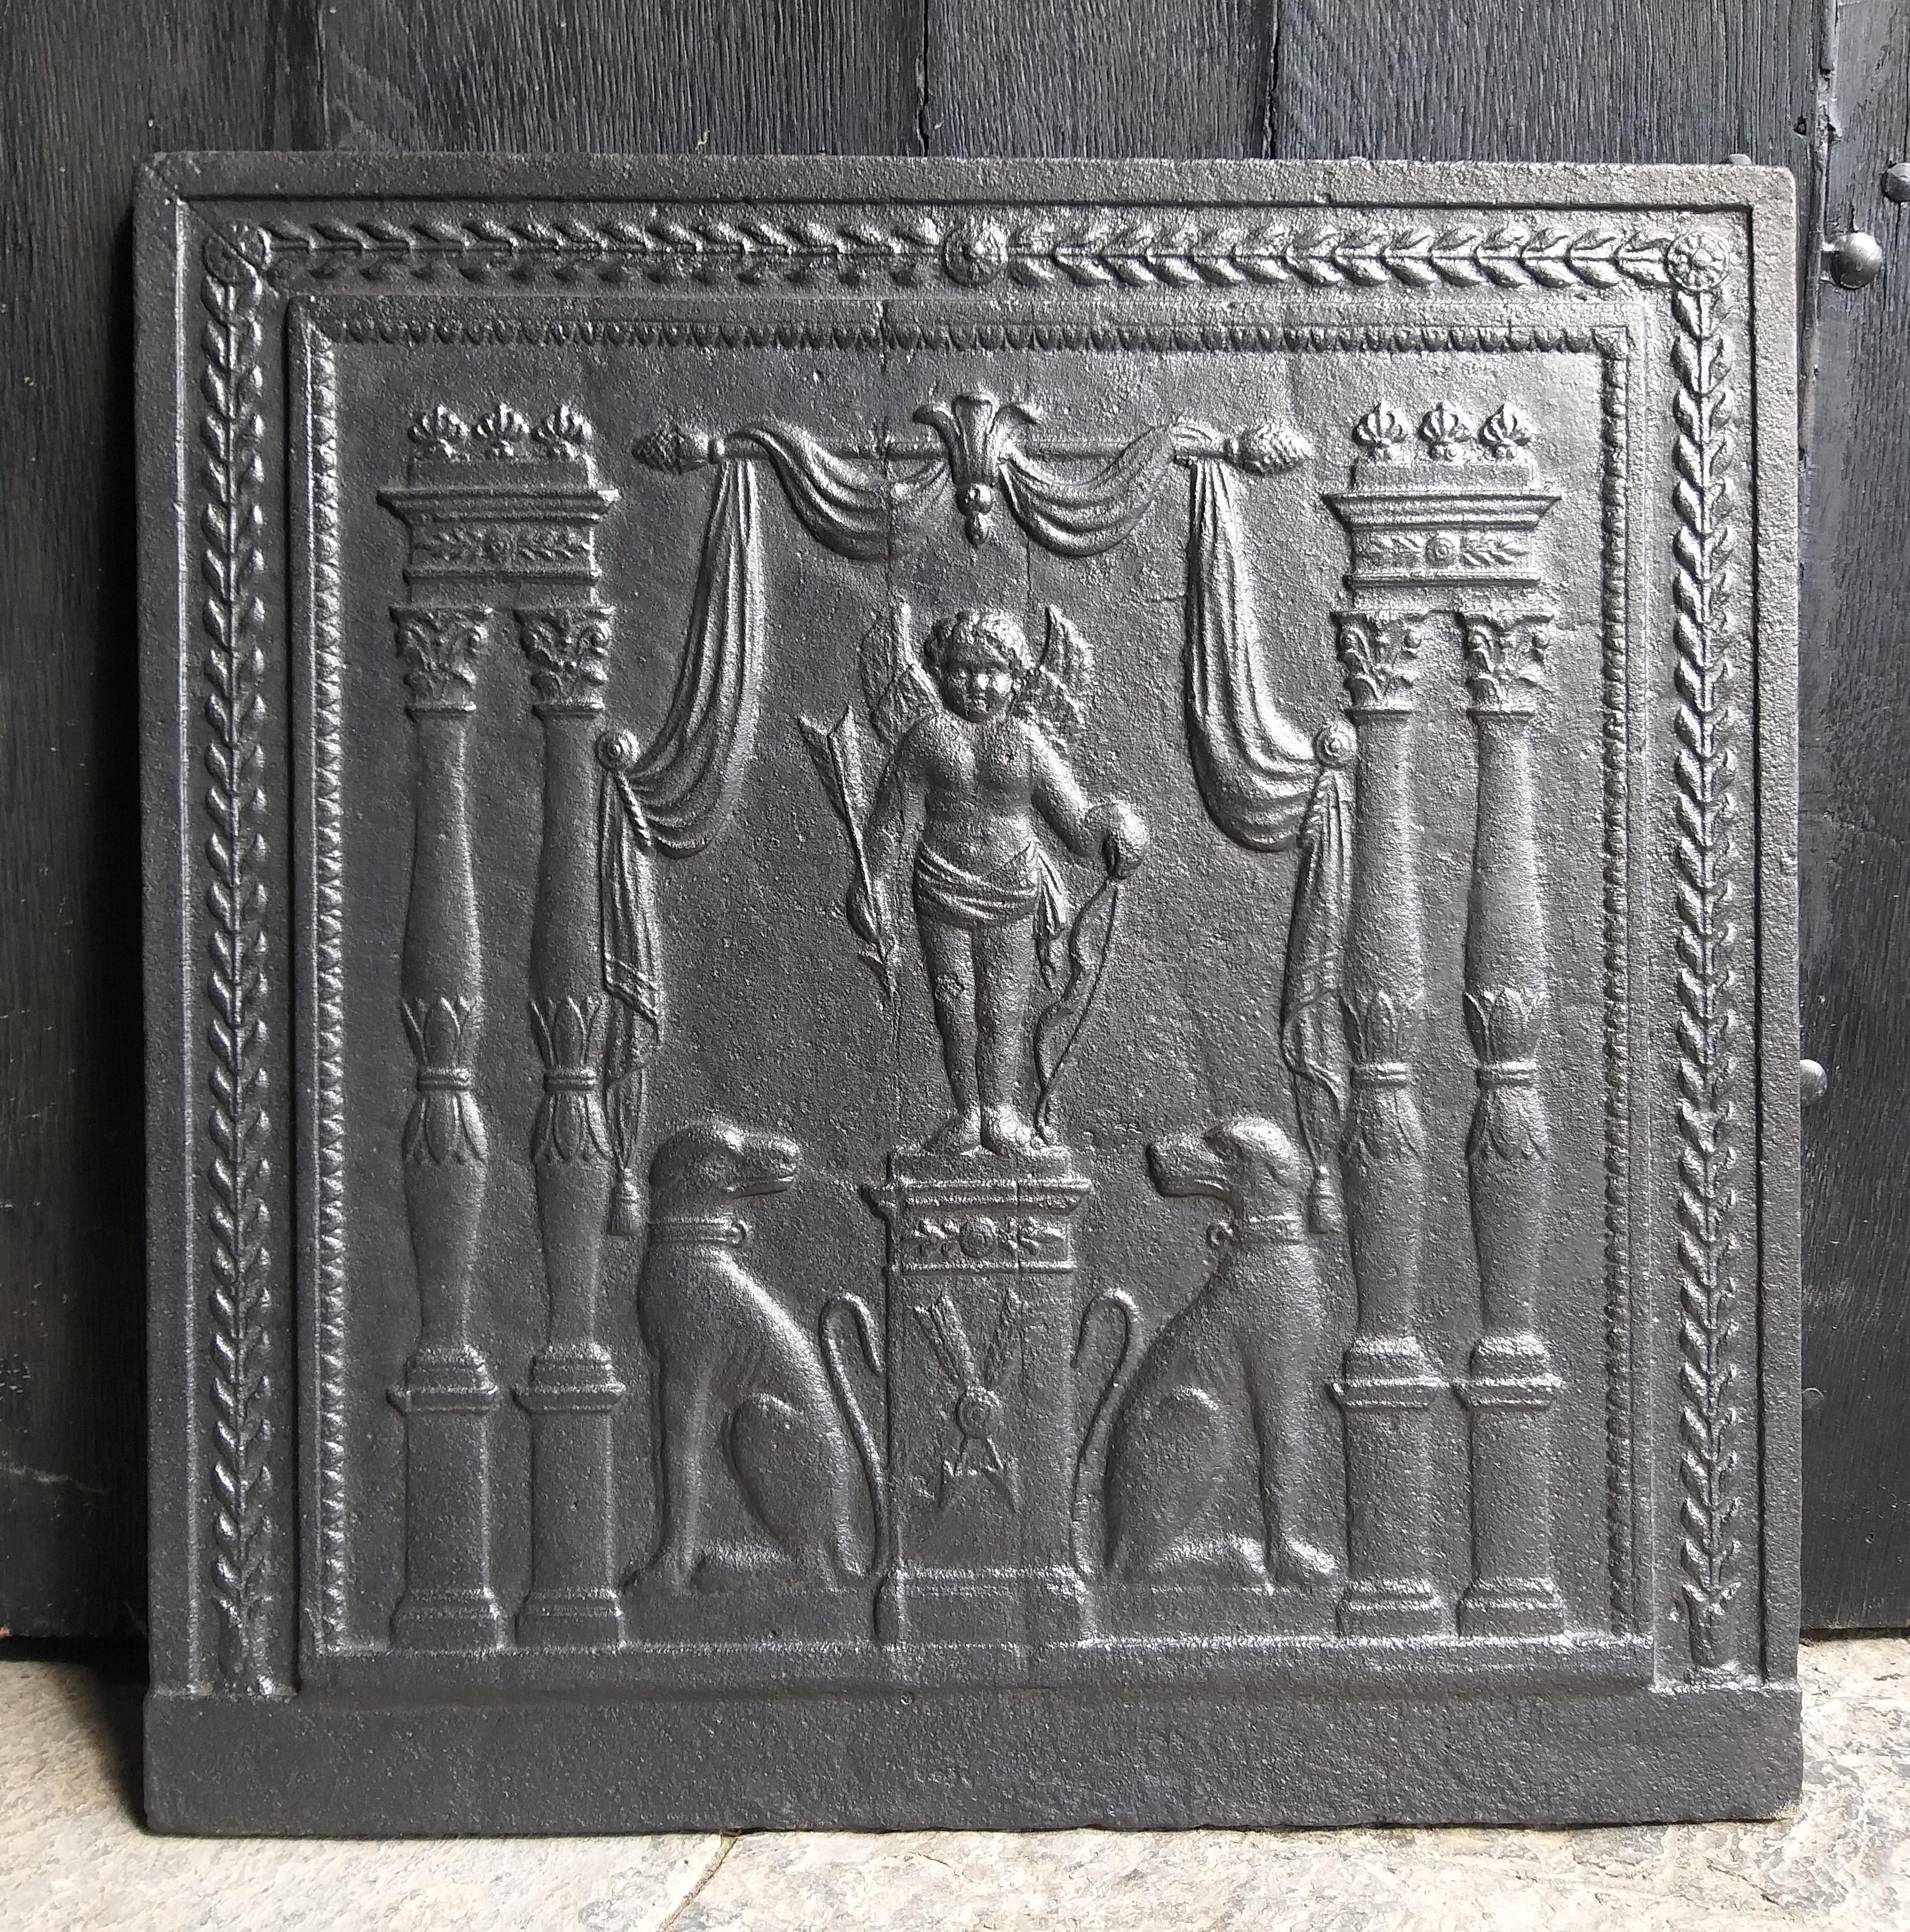 Fireback or backsplash in the neo-classical style in very good condition.
'The protection of Cupid with his bow, God of Desire'.
Dates back to the 19th century: 1800-1820. (Empire II : 1804-1815)
Often, like here, a vertical or horizontal line is